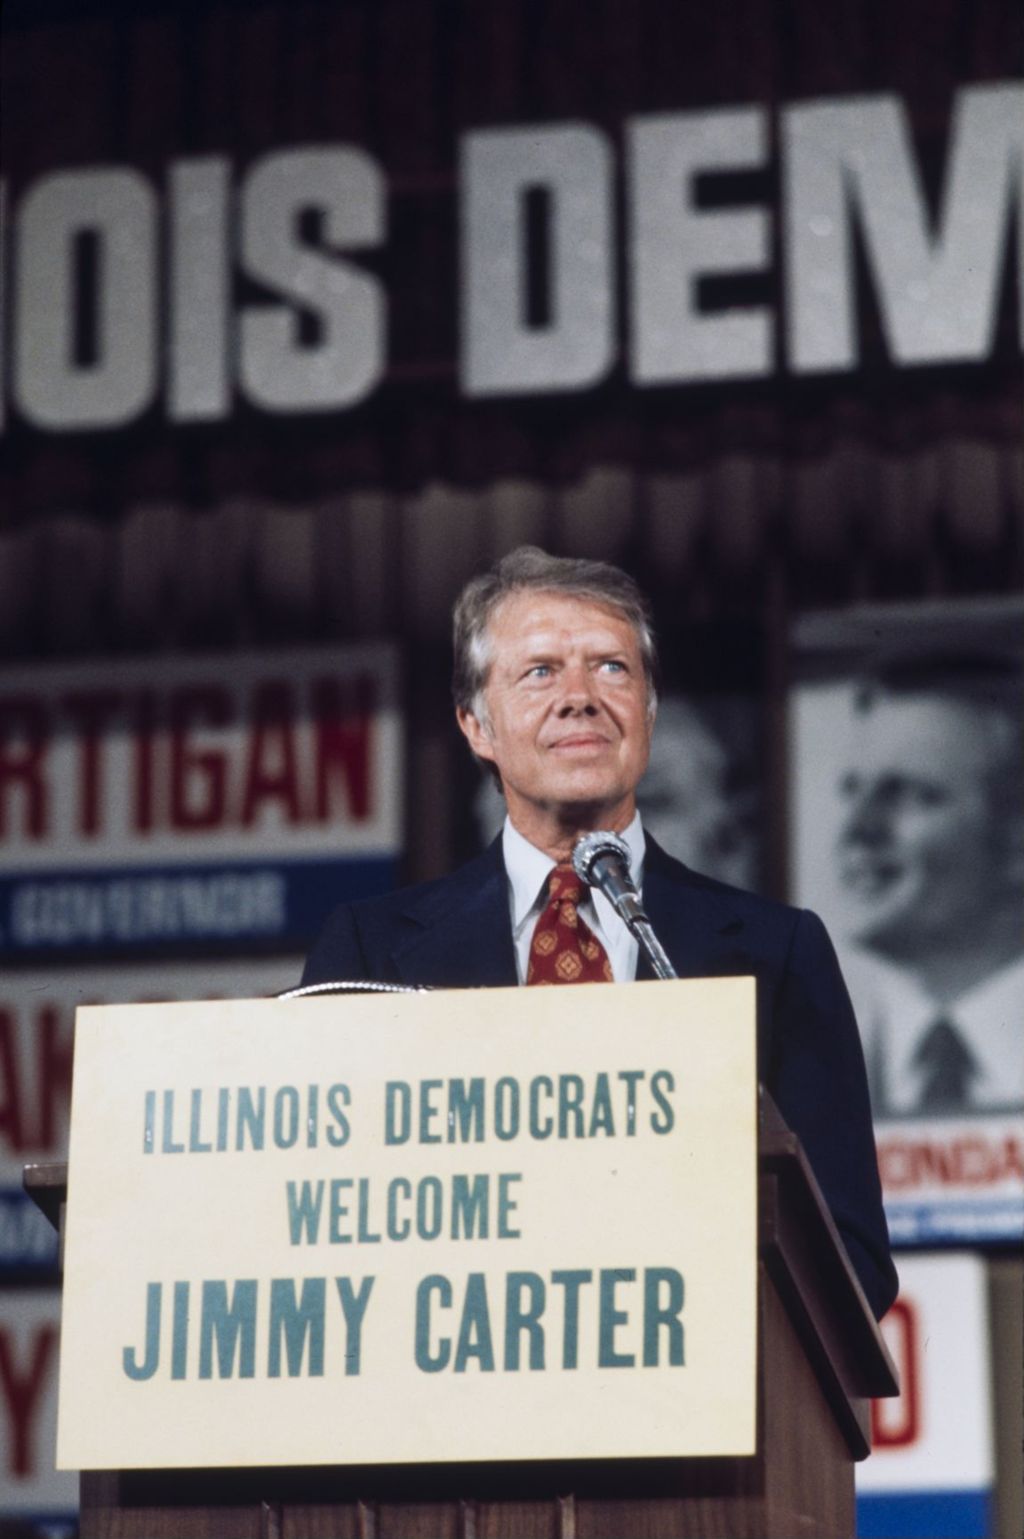 Jimmy Carter at the Illinois Democratic Convention